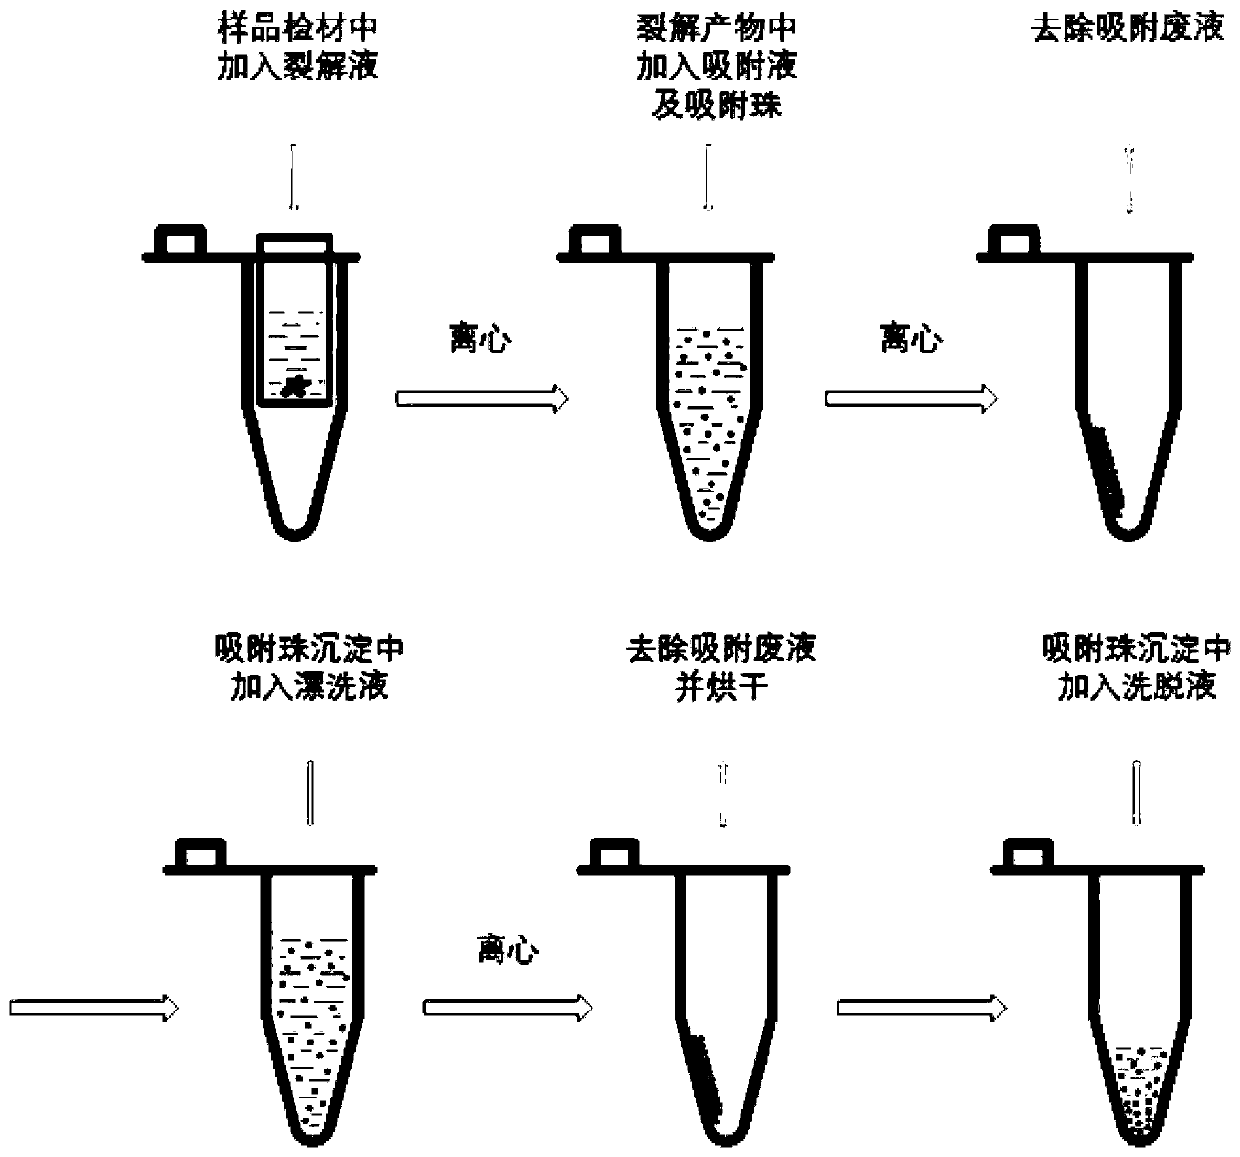 Silicon bead test nucleic acid extraction kit as well as use method and application thereof